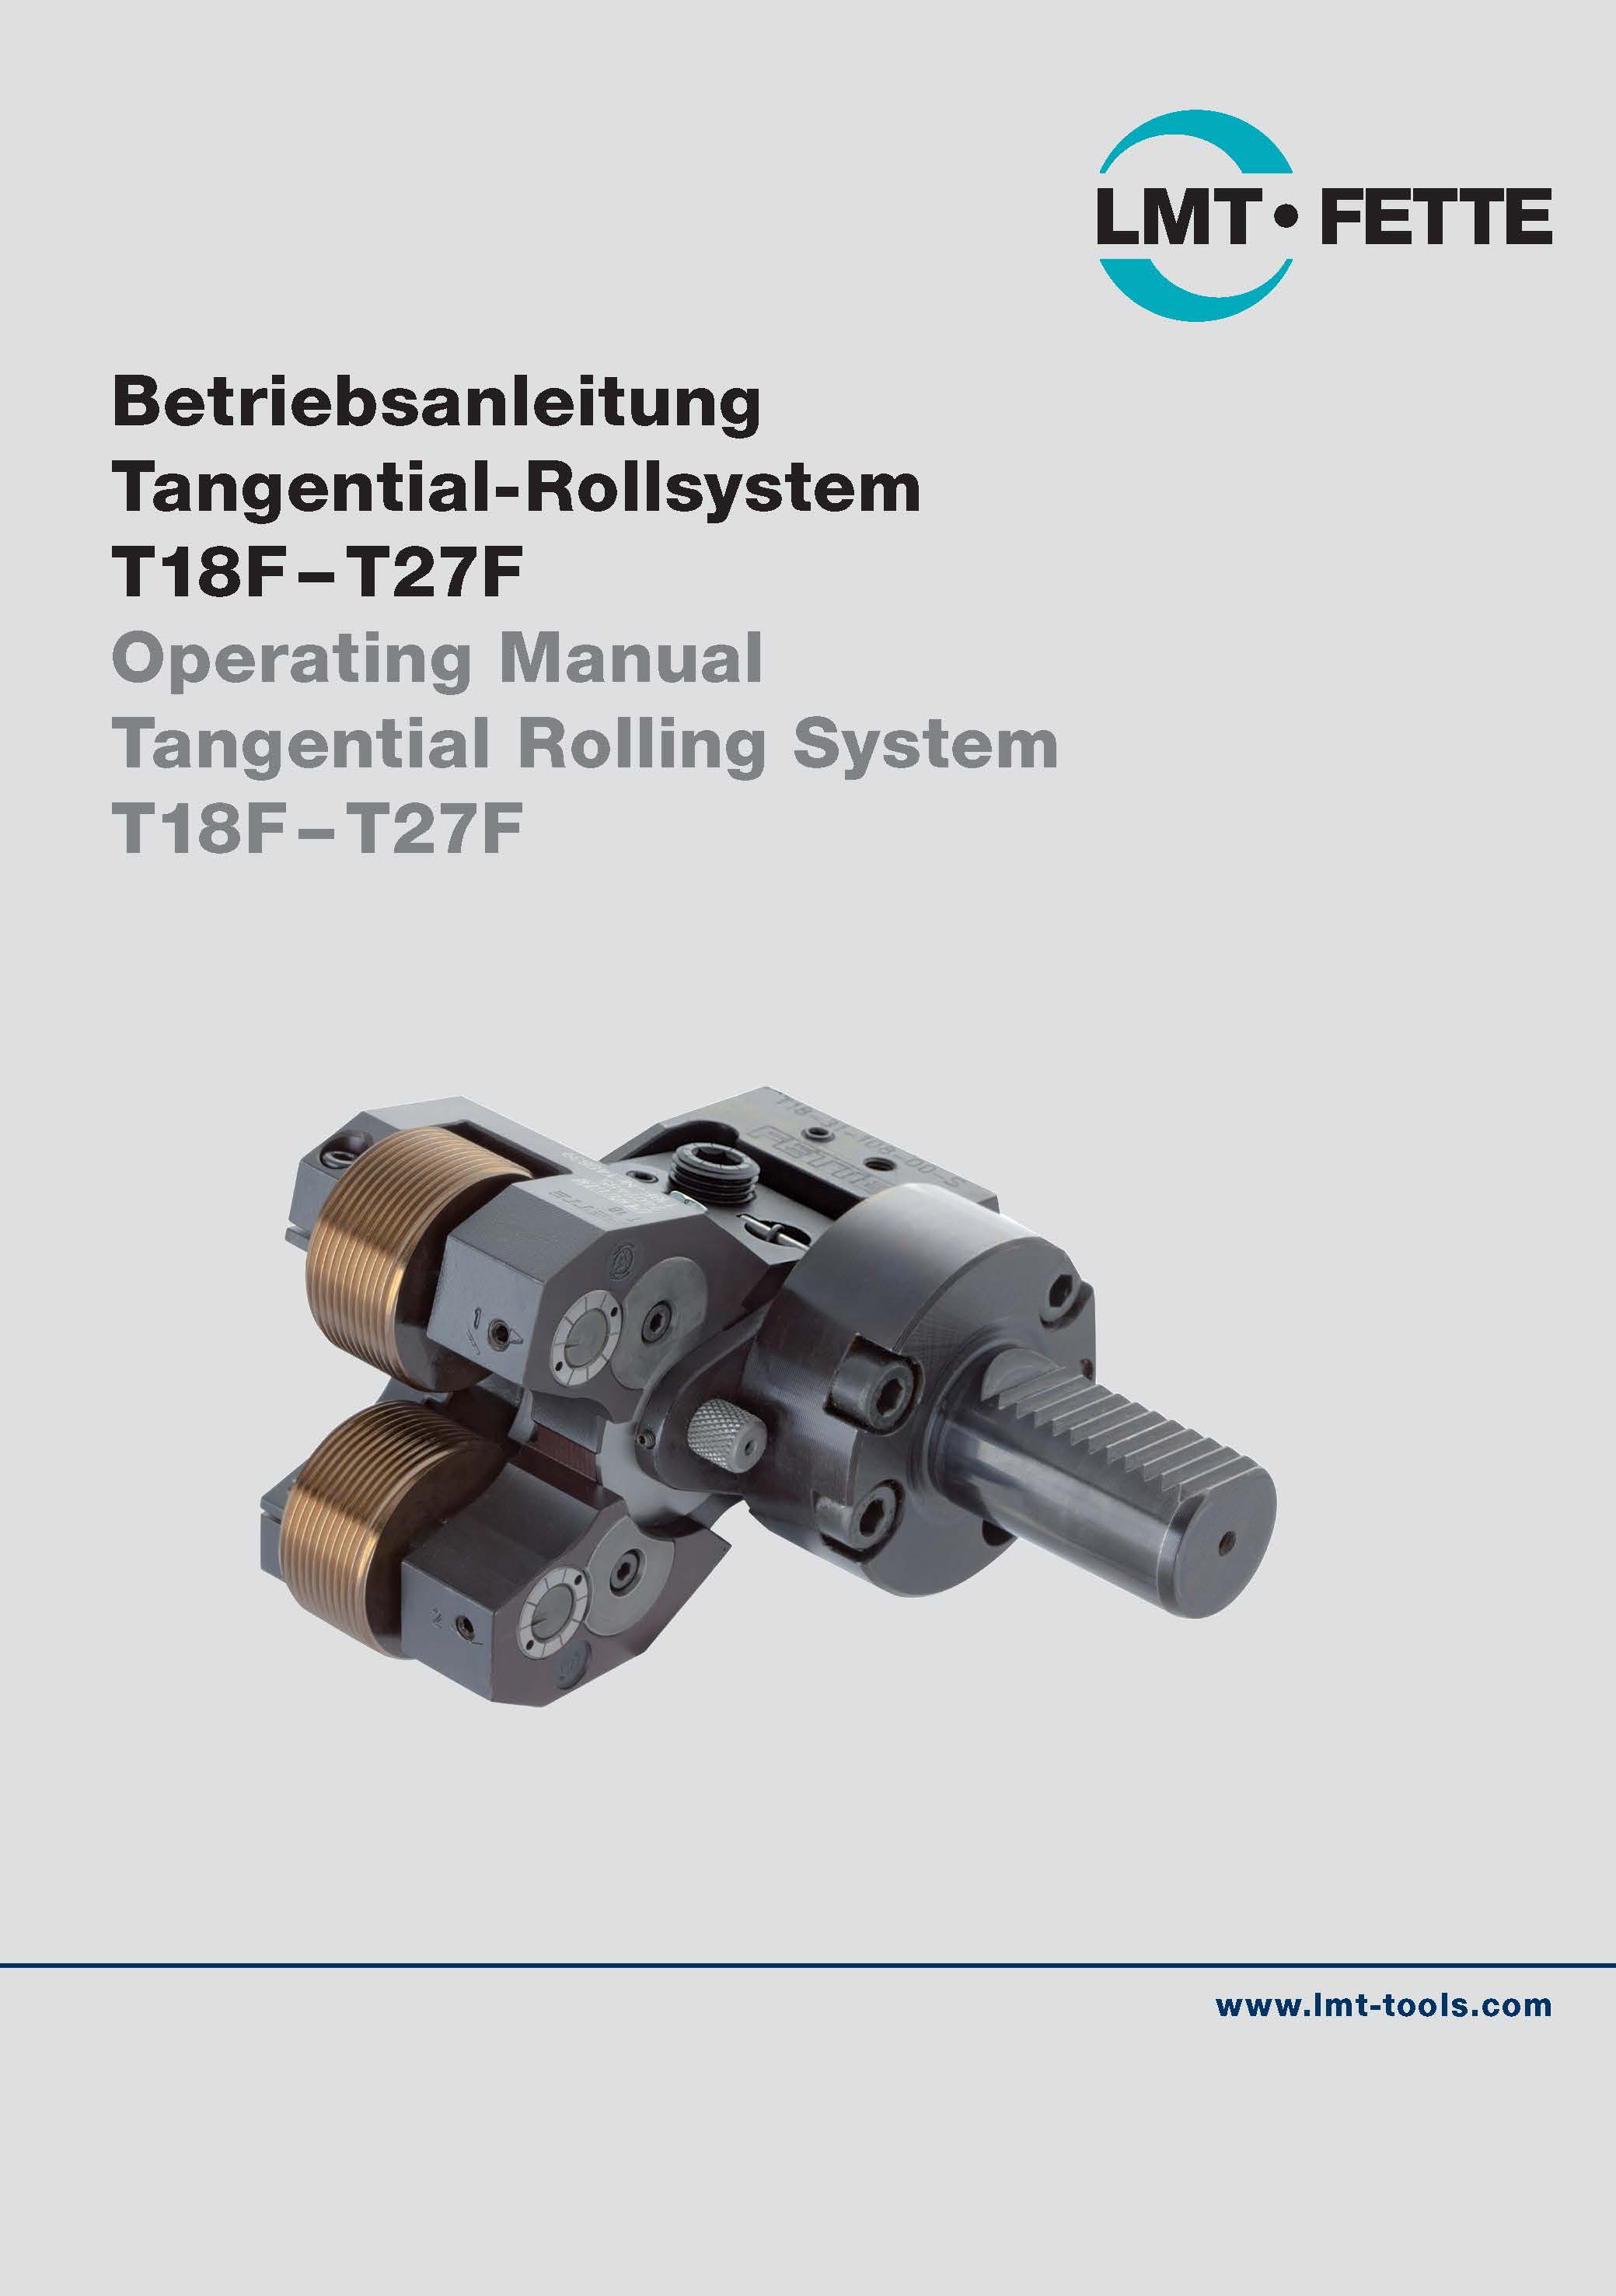 Operating Manual Tangential Rolling System T18F-T27F